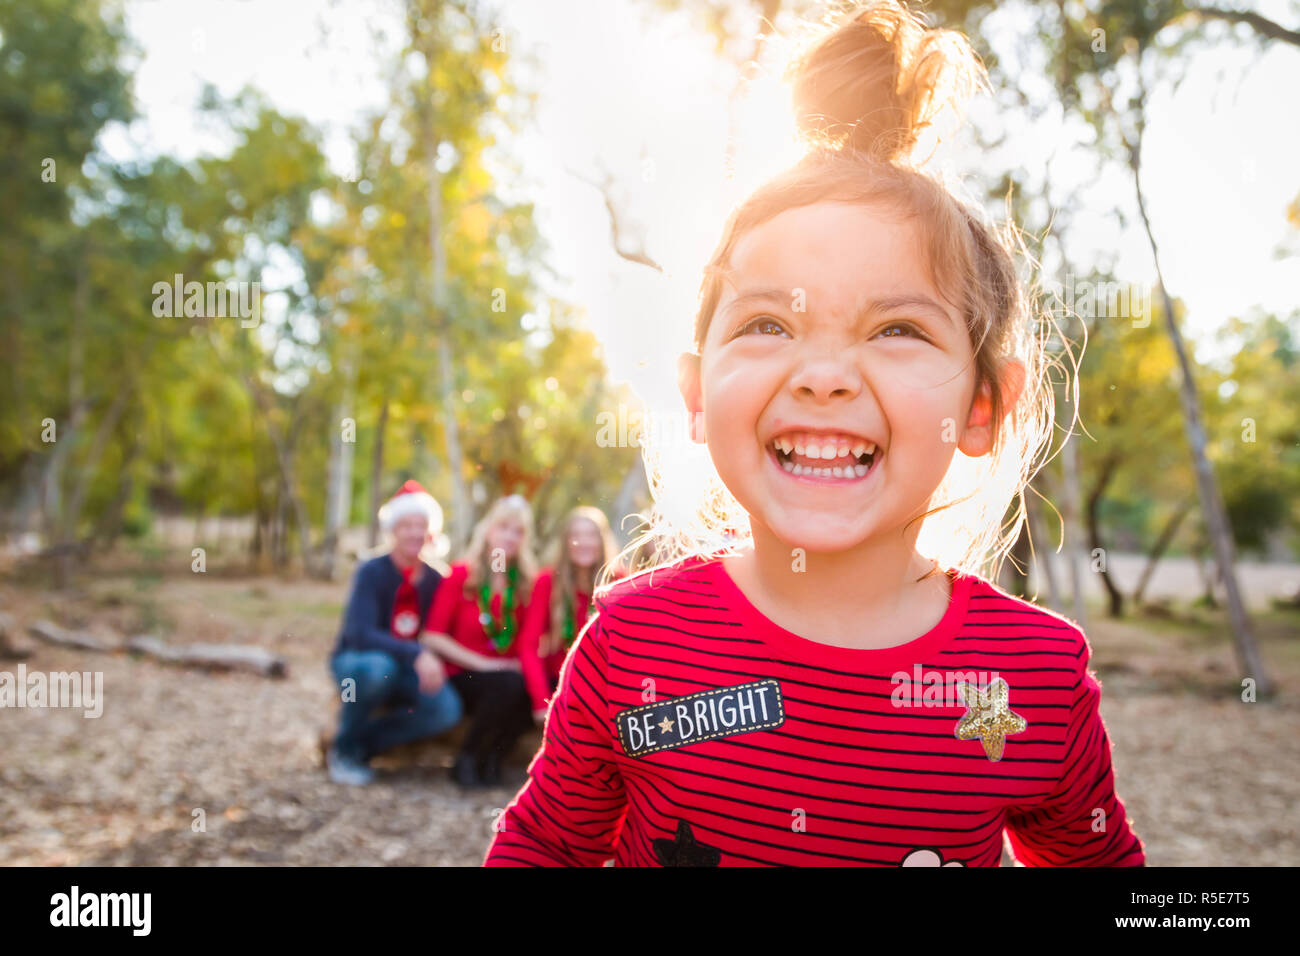 Cute Mixed Race Baby Girl Christmas Portrait With Family Behind Outdoors. Stock Photo